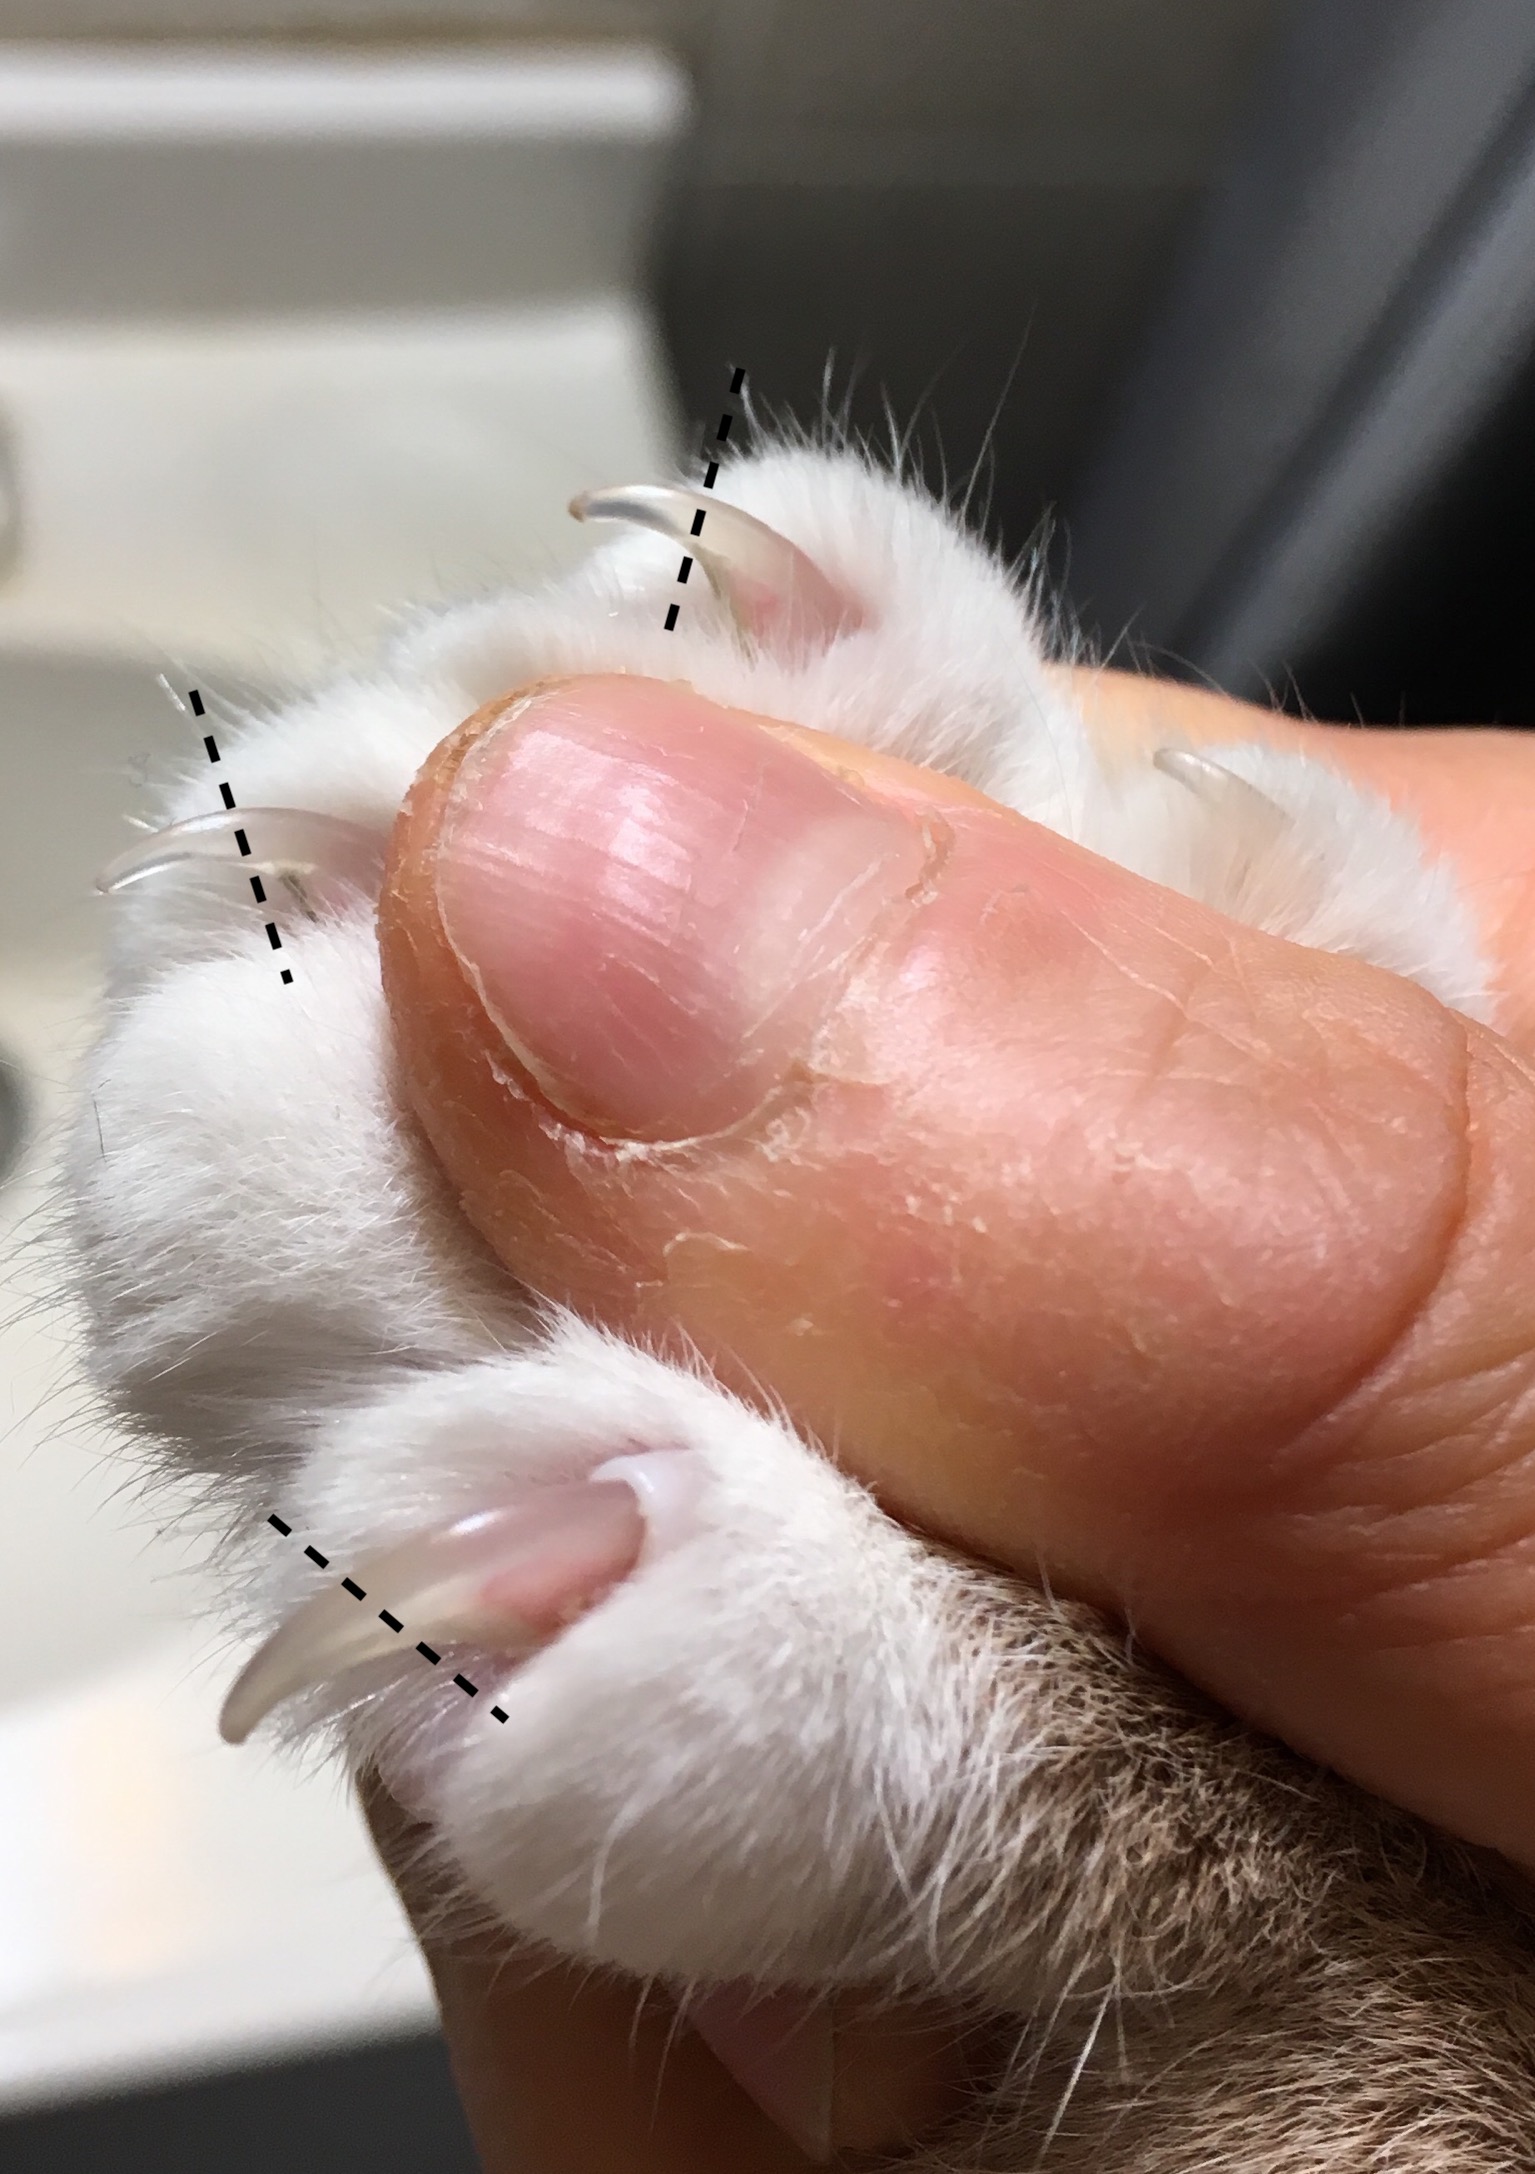 Cat's Claws Click When He Walks | TheCatSite